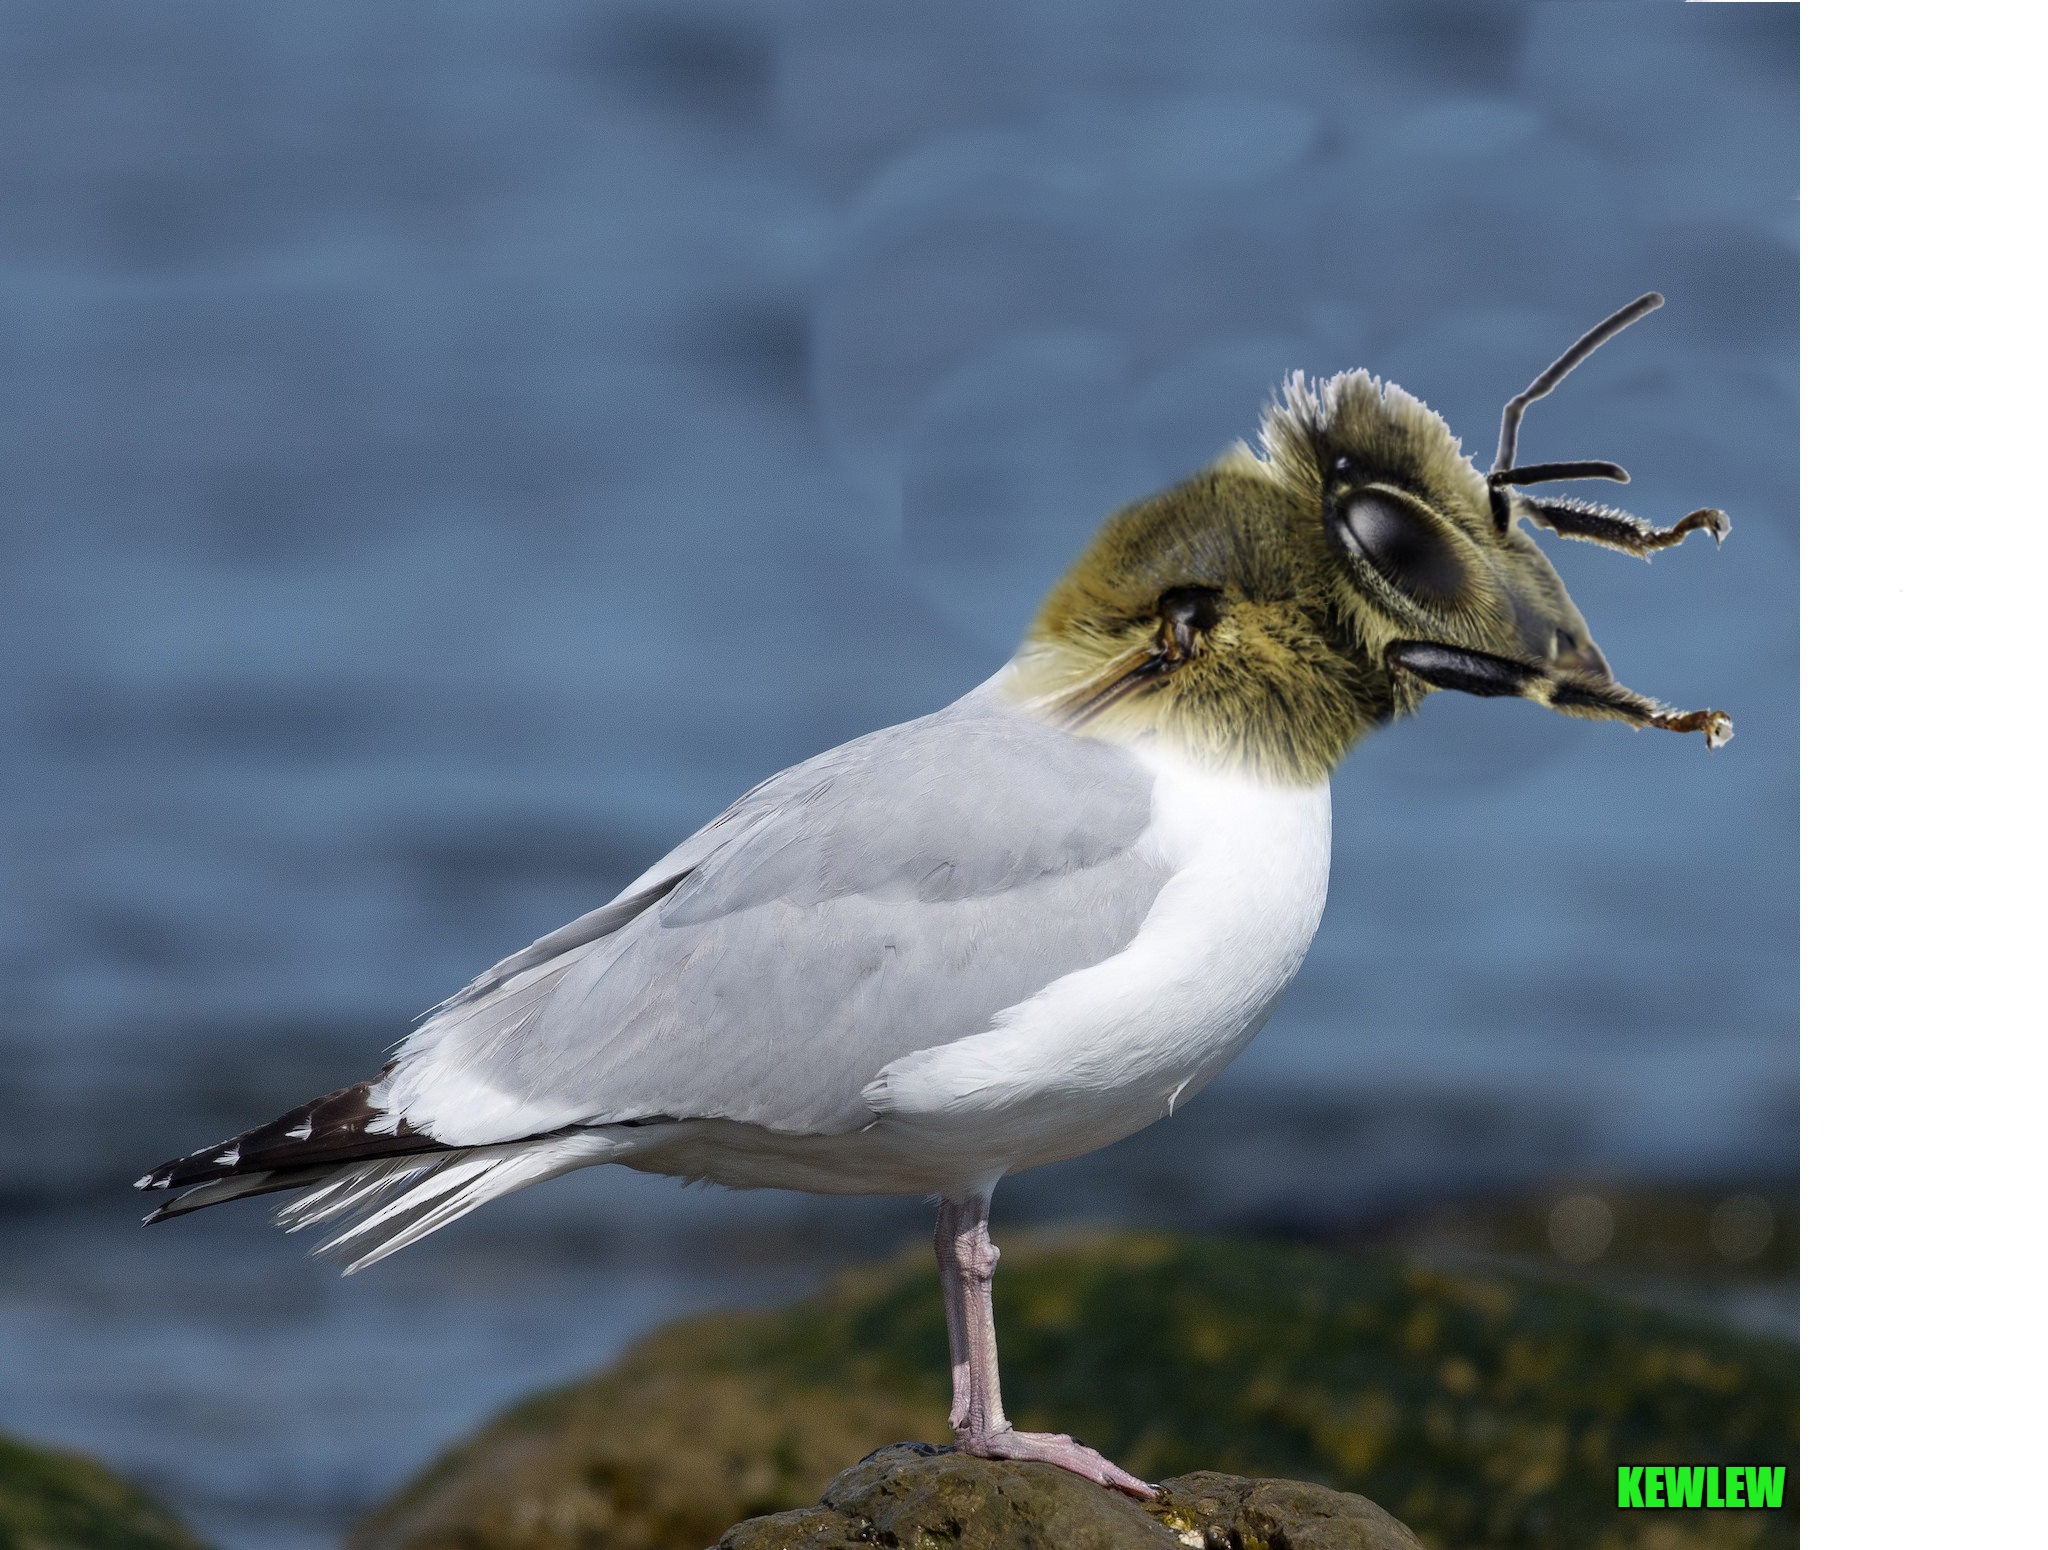 A beegull | KEWLEW | image tagged in beegull,kewlew,photoshopped | made w/ Imgflip meme maker